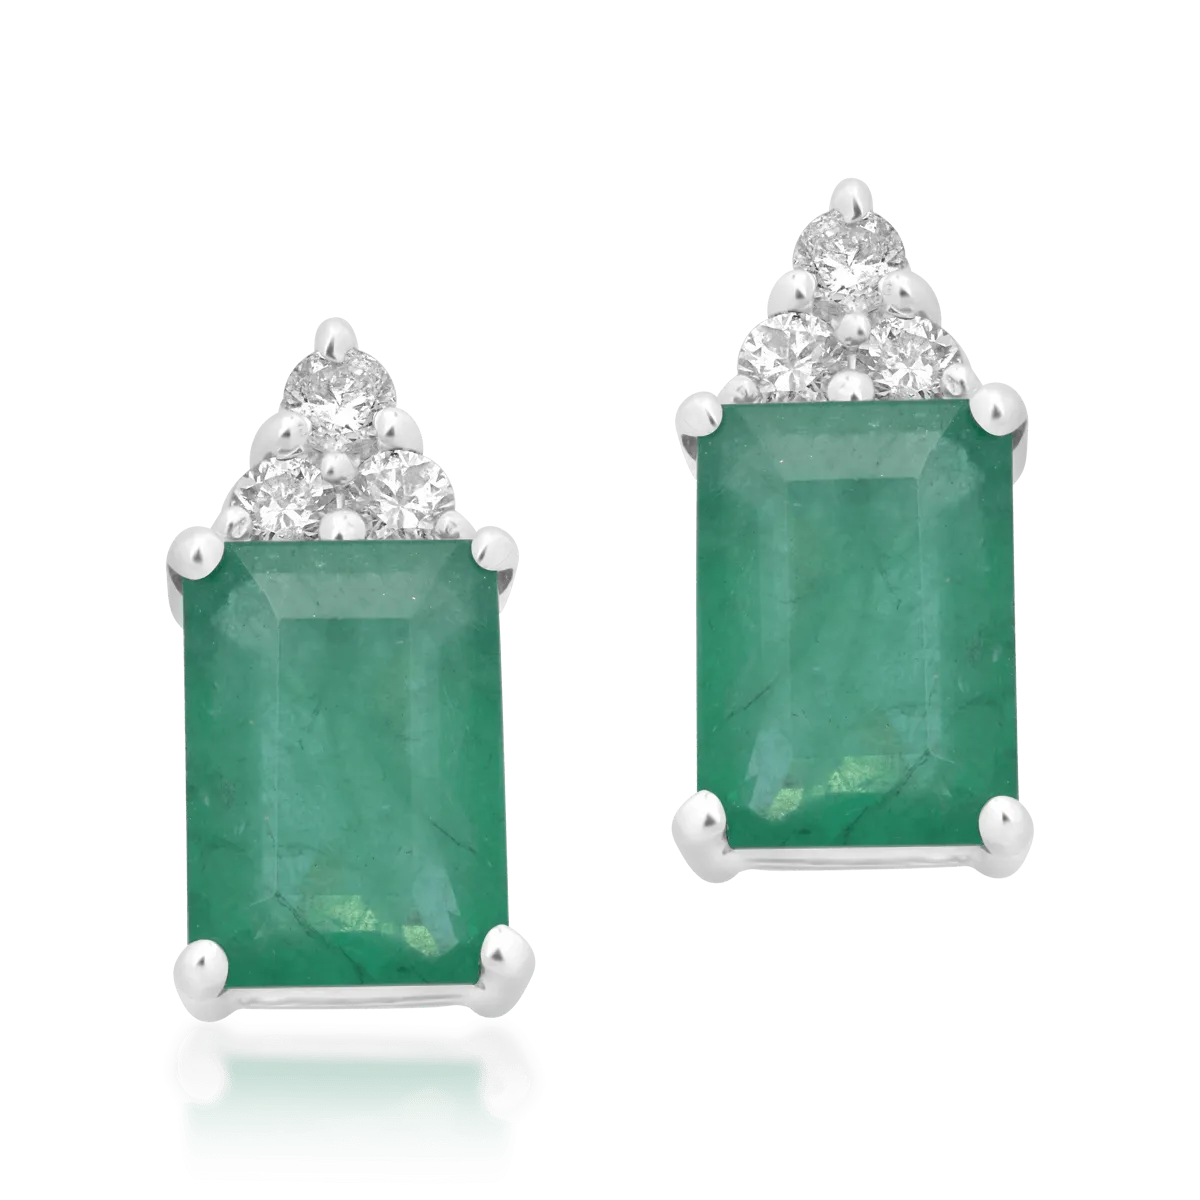 14K white gold earrings with 2.04ct emeralds and 0.13ct diamonds